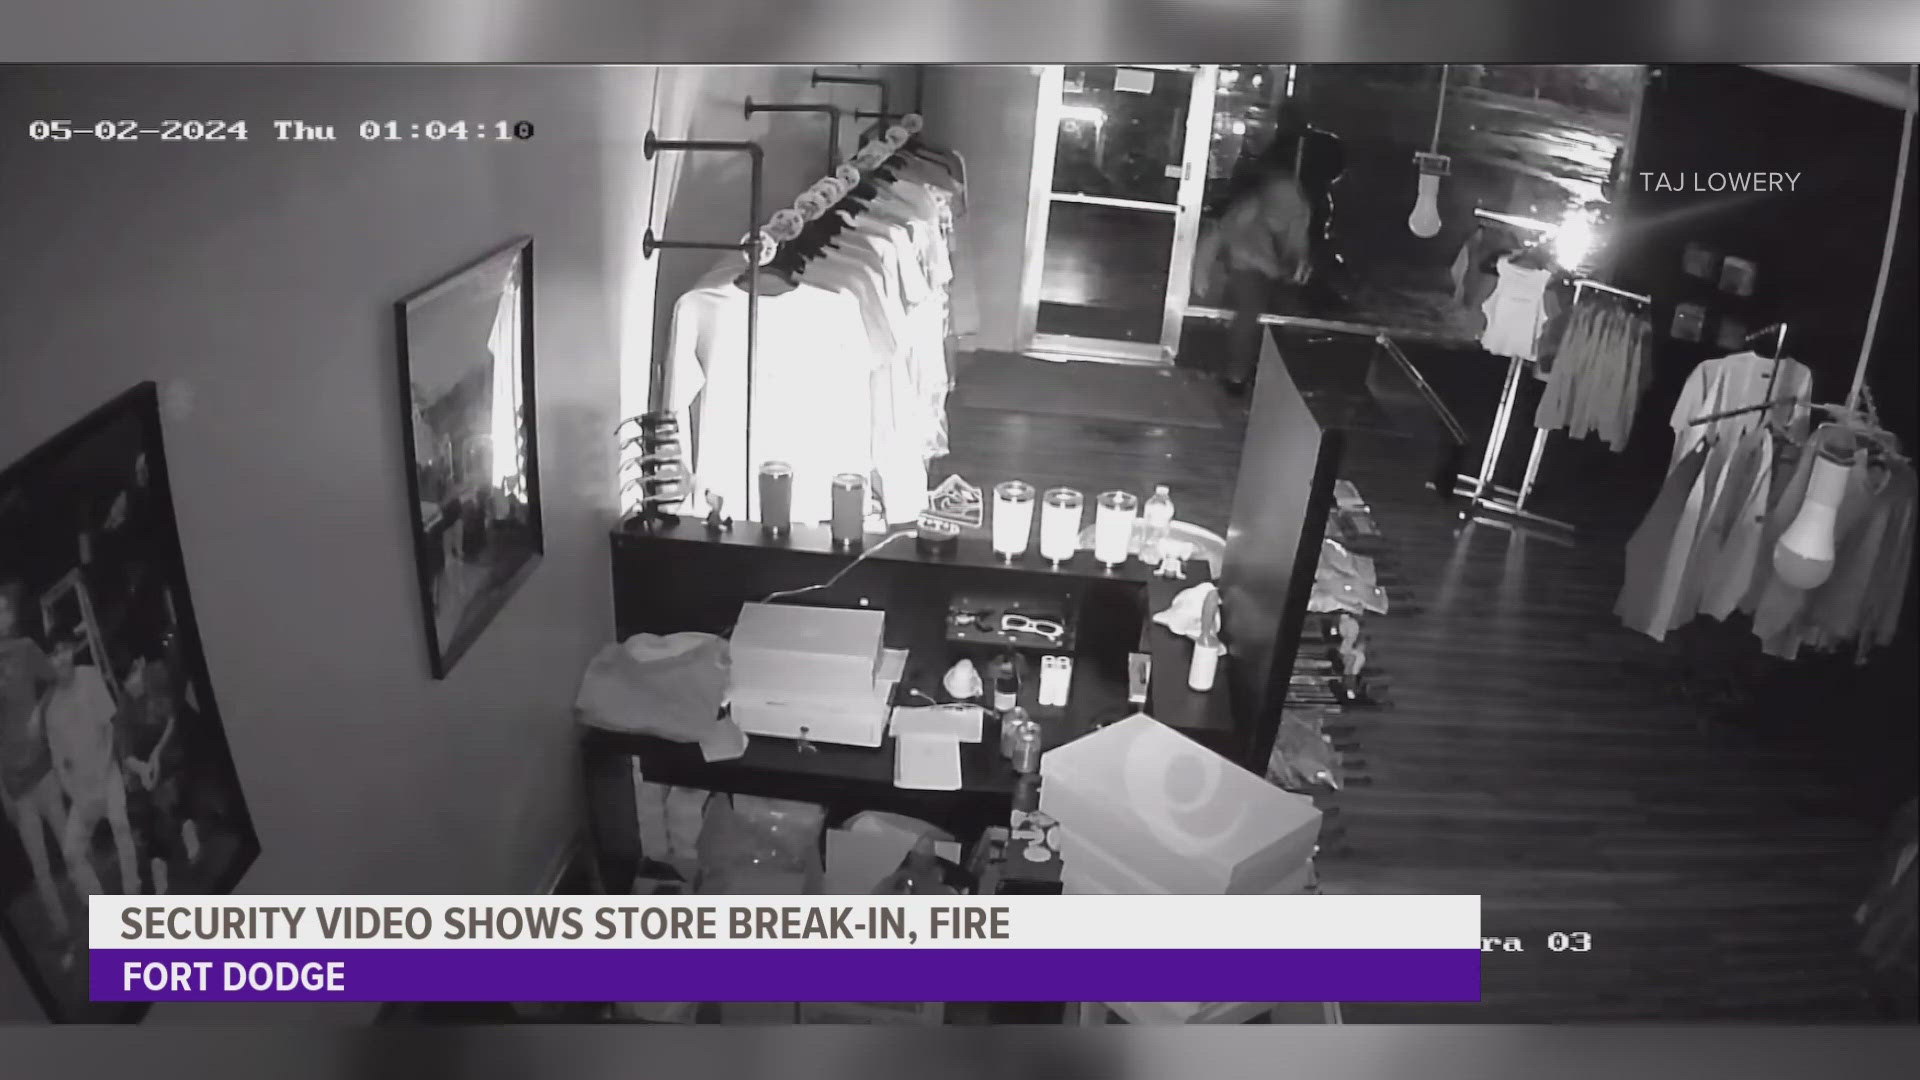 Video shows someone breaking in and setting fire to apparel at the store.